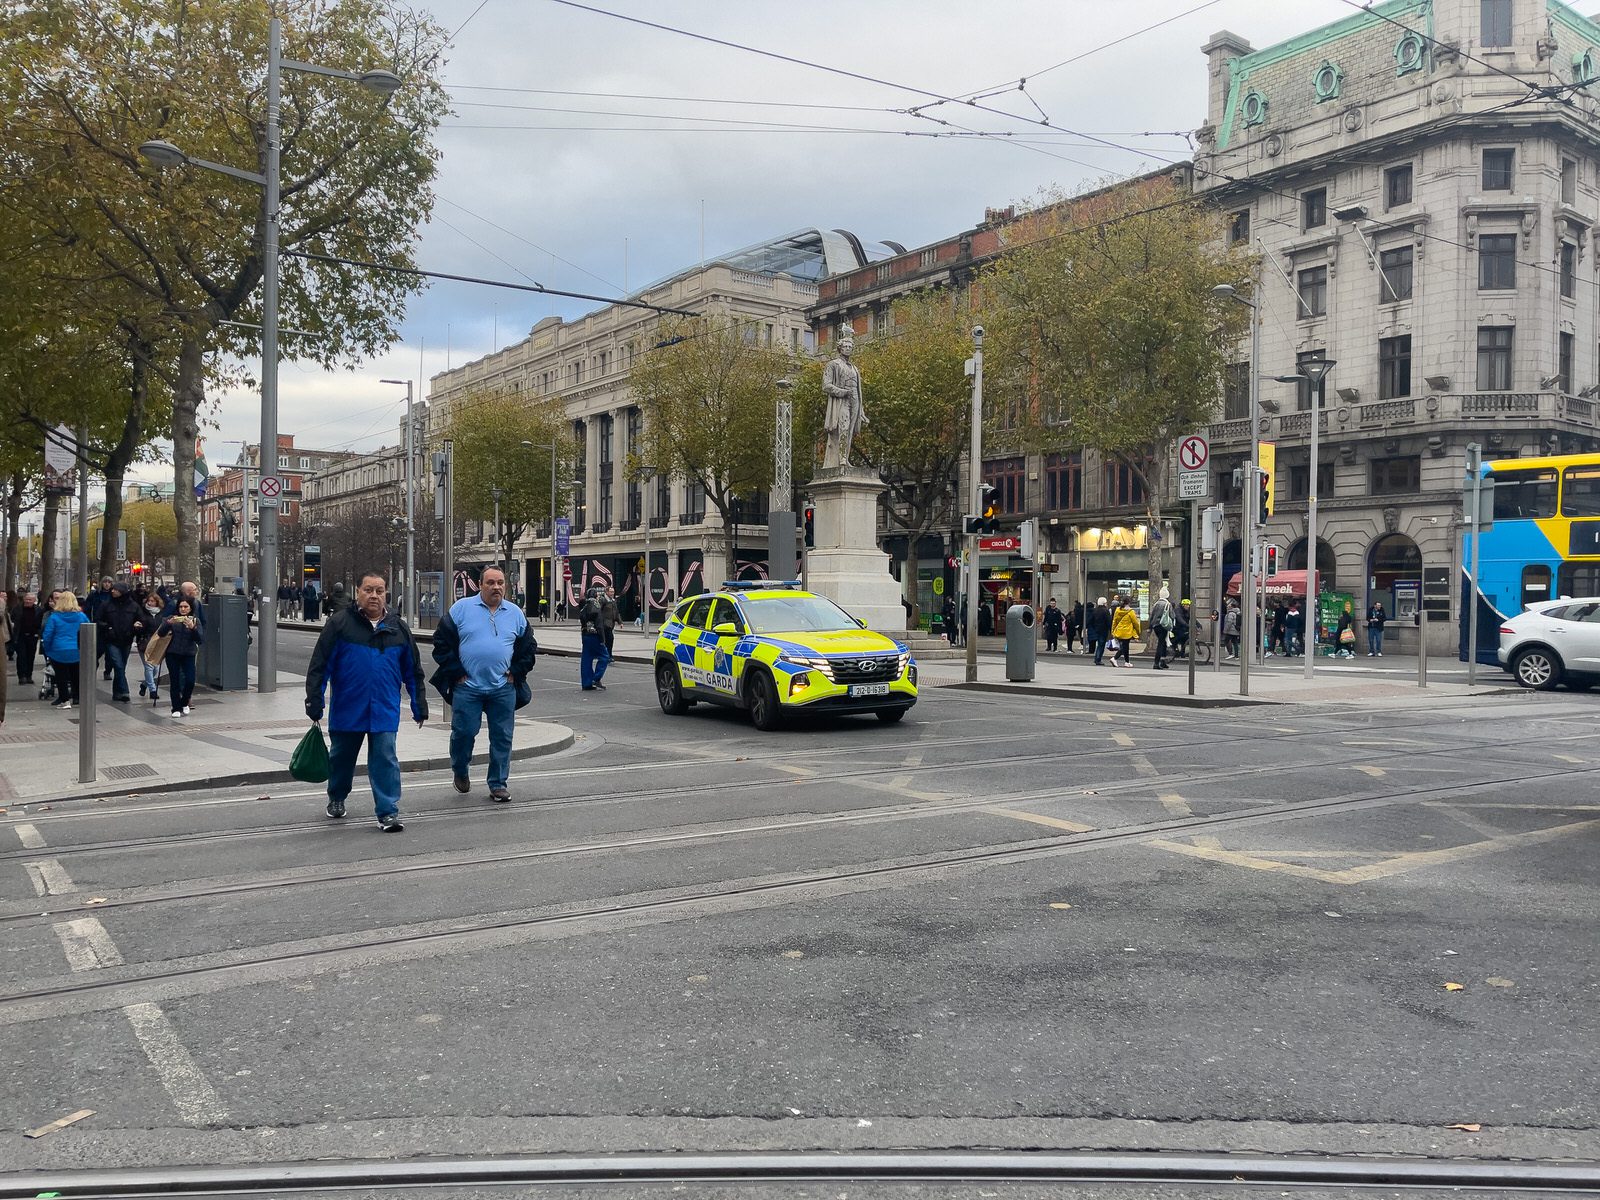 DUBLIN CITY CENTRE [THE DAY AFTER THE RIOT AND LITTLE TO SEE]-225296-1